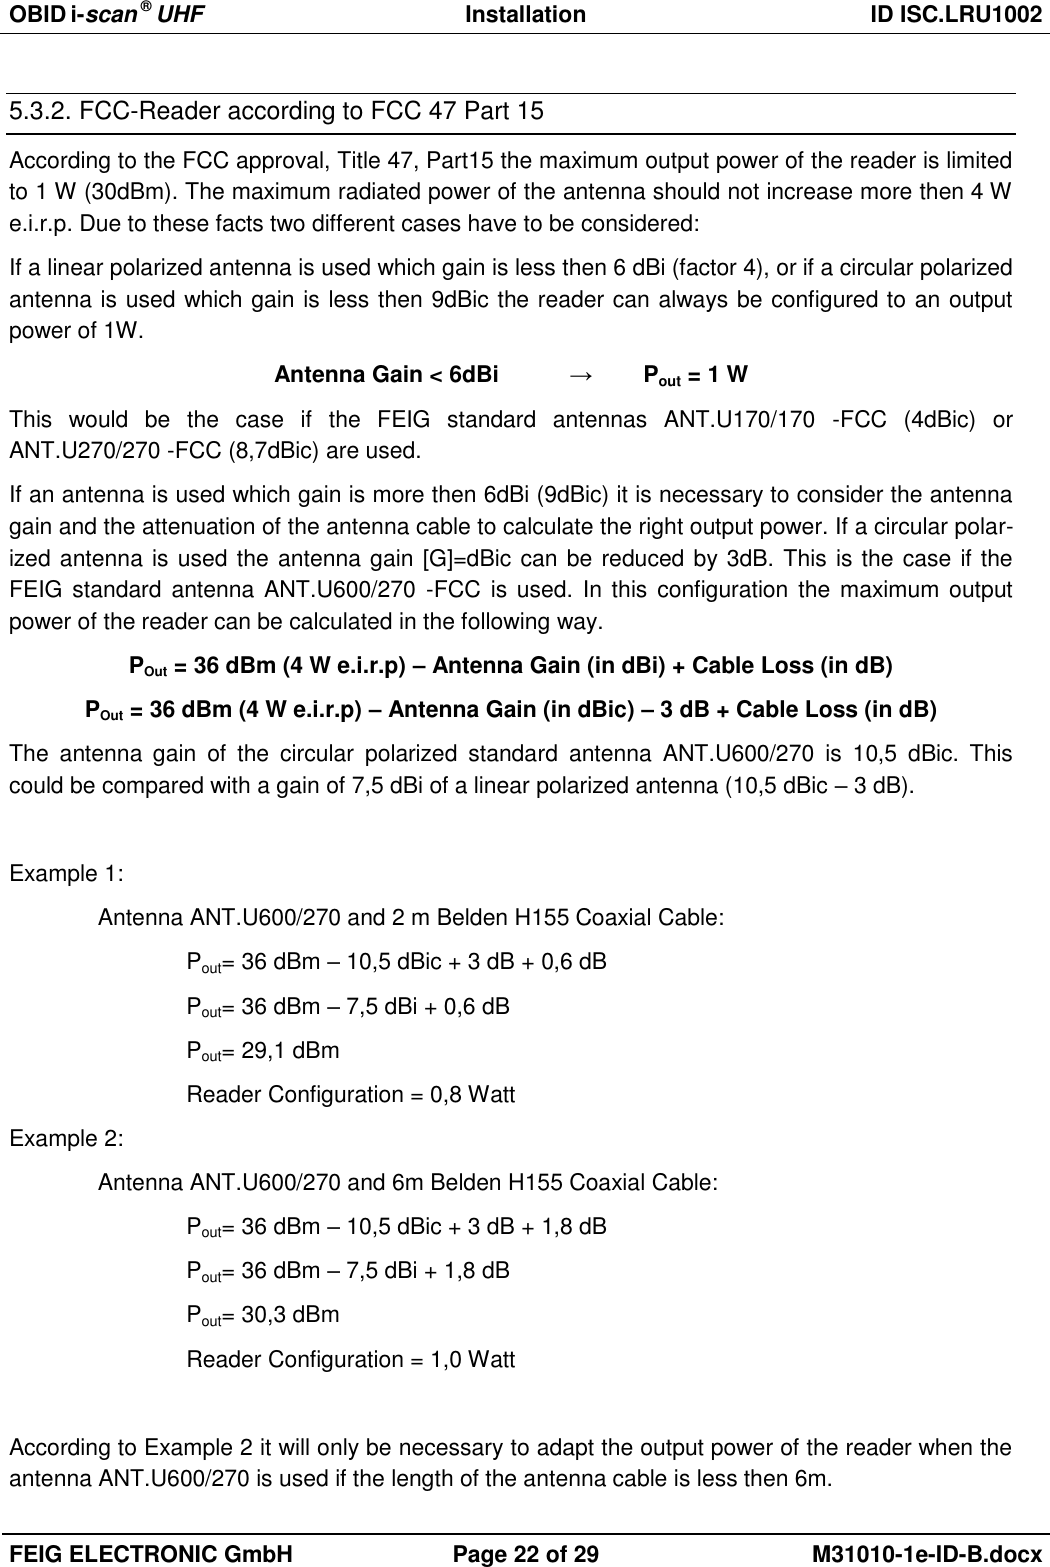 OBID i-scan ® UHF Installation ID ISC.LRU1002  FEIG ELECTRONIC GmbH Page 22 of 29 M31010-1e-ID-B.docx  5.3.2. FCC-Reader according to FCC 47 Part 15 According to the FCC approval, Title 47, Part15 the maximum output power of the reader is limited to 1 W (30dBm). The maximum radiated power of the antenna should not increase more then 4 W e.i.r.p. Due to these facts two different cases have to be considered: If a linear polarized antenna is used which gain is less then 6 dBi (factor 4), or if a circular polarized antenna is used which gain is less then 9dBic the reader can always be configured to an output power of 1W. Antenna Gain &lt; 6dBi   →  Pout = 1 W This  would  be  the  case  if  the  FEIG  standard  antennas  ANT.U170/170  -FCC  (4dBic)  or ANT.U270/270 -FCC (8,7dBic) are used. If an antenna is used which gain is more then 6dBi (9dBic) it is necessary to consider the antenna gain and the attenuation of the antenna cable to calculate the right output power. If a circular polar-ized antenna is used the antenna gain [G]=dBic can be reduced by 3dB. This is the case if the FEIG standard antenna ANT.U600/270  -FCC  is used. In this configuration the maximum output power of the reader can be calculated in the following way. POut = 36 dBm (4 W e.i.r.p) – Antenna Gain (in dBi) + Cable Loss (in dB) POut = 36 dBm (4 W e.i.r.p) – Antenna Gain (in dBic) – 3 dB + Cable Loss (in dB) The  antenna  gain  of  the  circular  polarized  standard  antenna  ANT.U600/270  is  10,5  dBic.  This could be compared with a gain of 7,5 dBi of a linear polarized antenna (10,5 dBic – 3 dB).   Example 1: Antenna ANT.U600/270 and 2 m Belden H155 Coaxial Cable: Pout= 36 dBm – 10,5 dBic + 3 dB + 0,6 dB Pout= 36 dBm – 7,5 dBi + 0,6 dB Pout= 29,1 dBm  Reader Configuration = 0,8 Watt Example 2: Antenna ANT.U600/270 and 6m Belden H155 Coaxial Cable: Pout= 36 dBm – 10,5 dBic + 3 dB + 1,8 dB Pout= 36 dBm – 7,5 dBi + 1,8 dB Pout= 30,3 dBm    Reader Configuration = 1,0 Watt  According to Example 2 it will only be necessary to adapt the output power of the reader when the antenna ANT.U600/270 is used if the length of the antenna cable is less then 6m. 